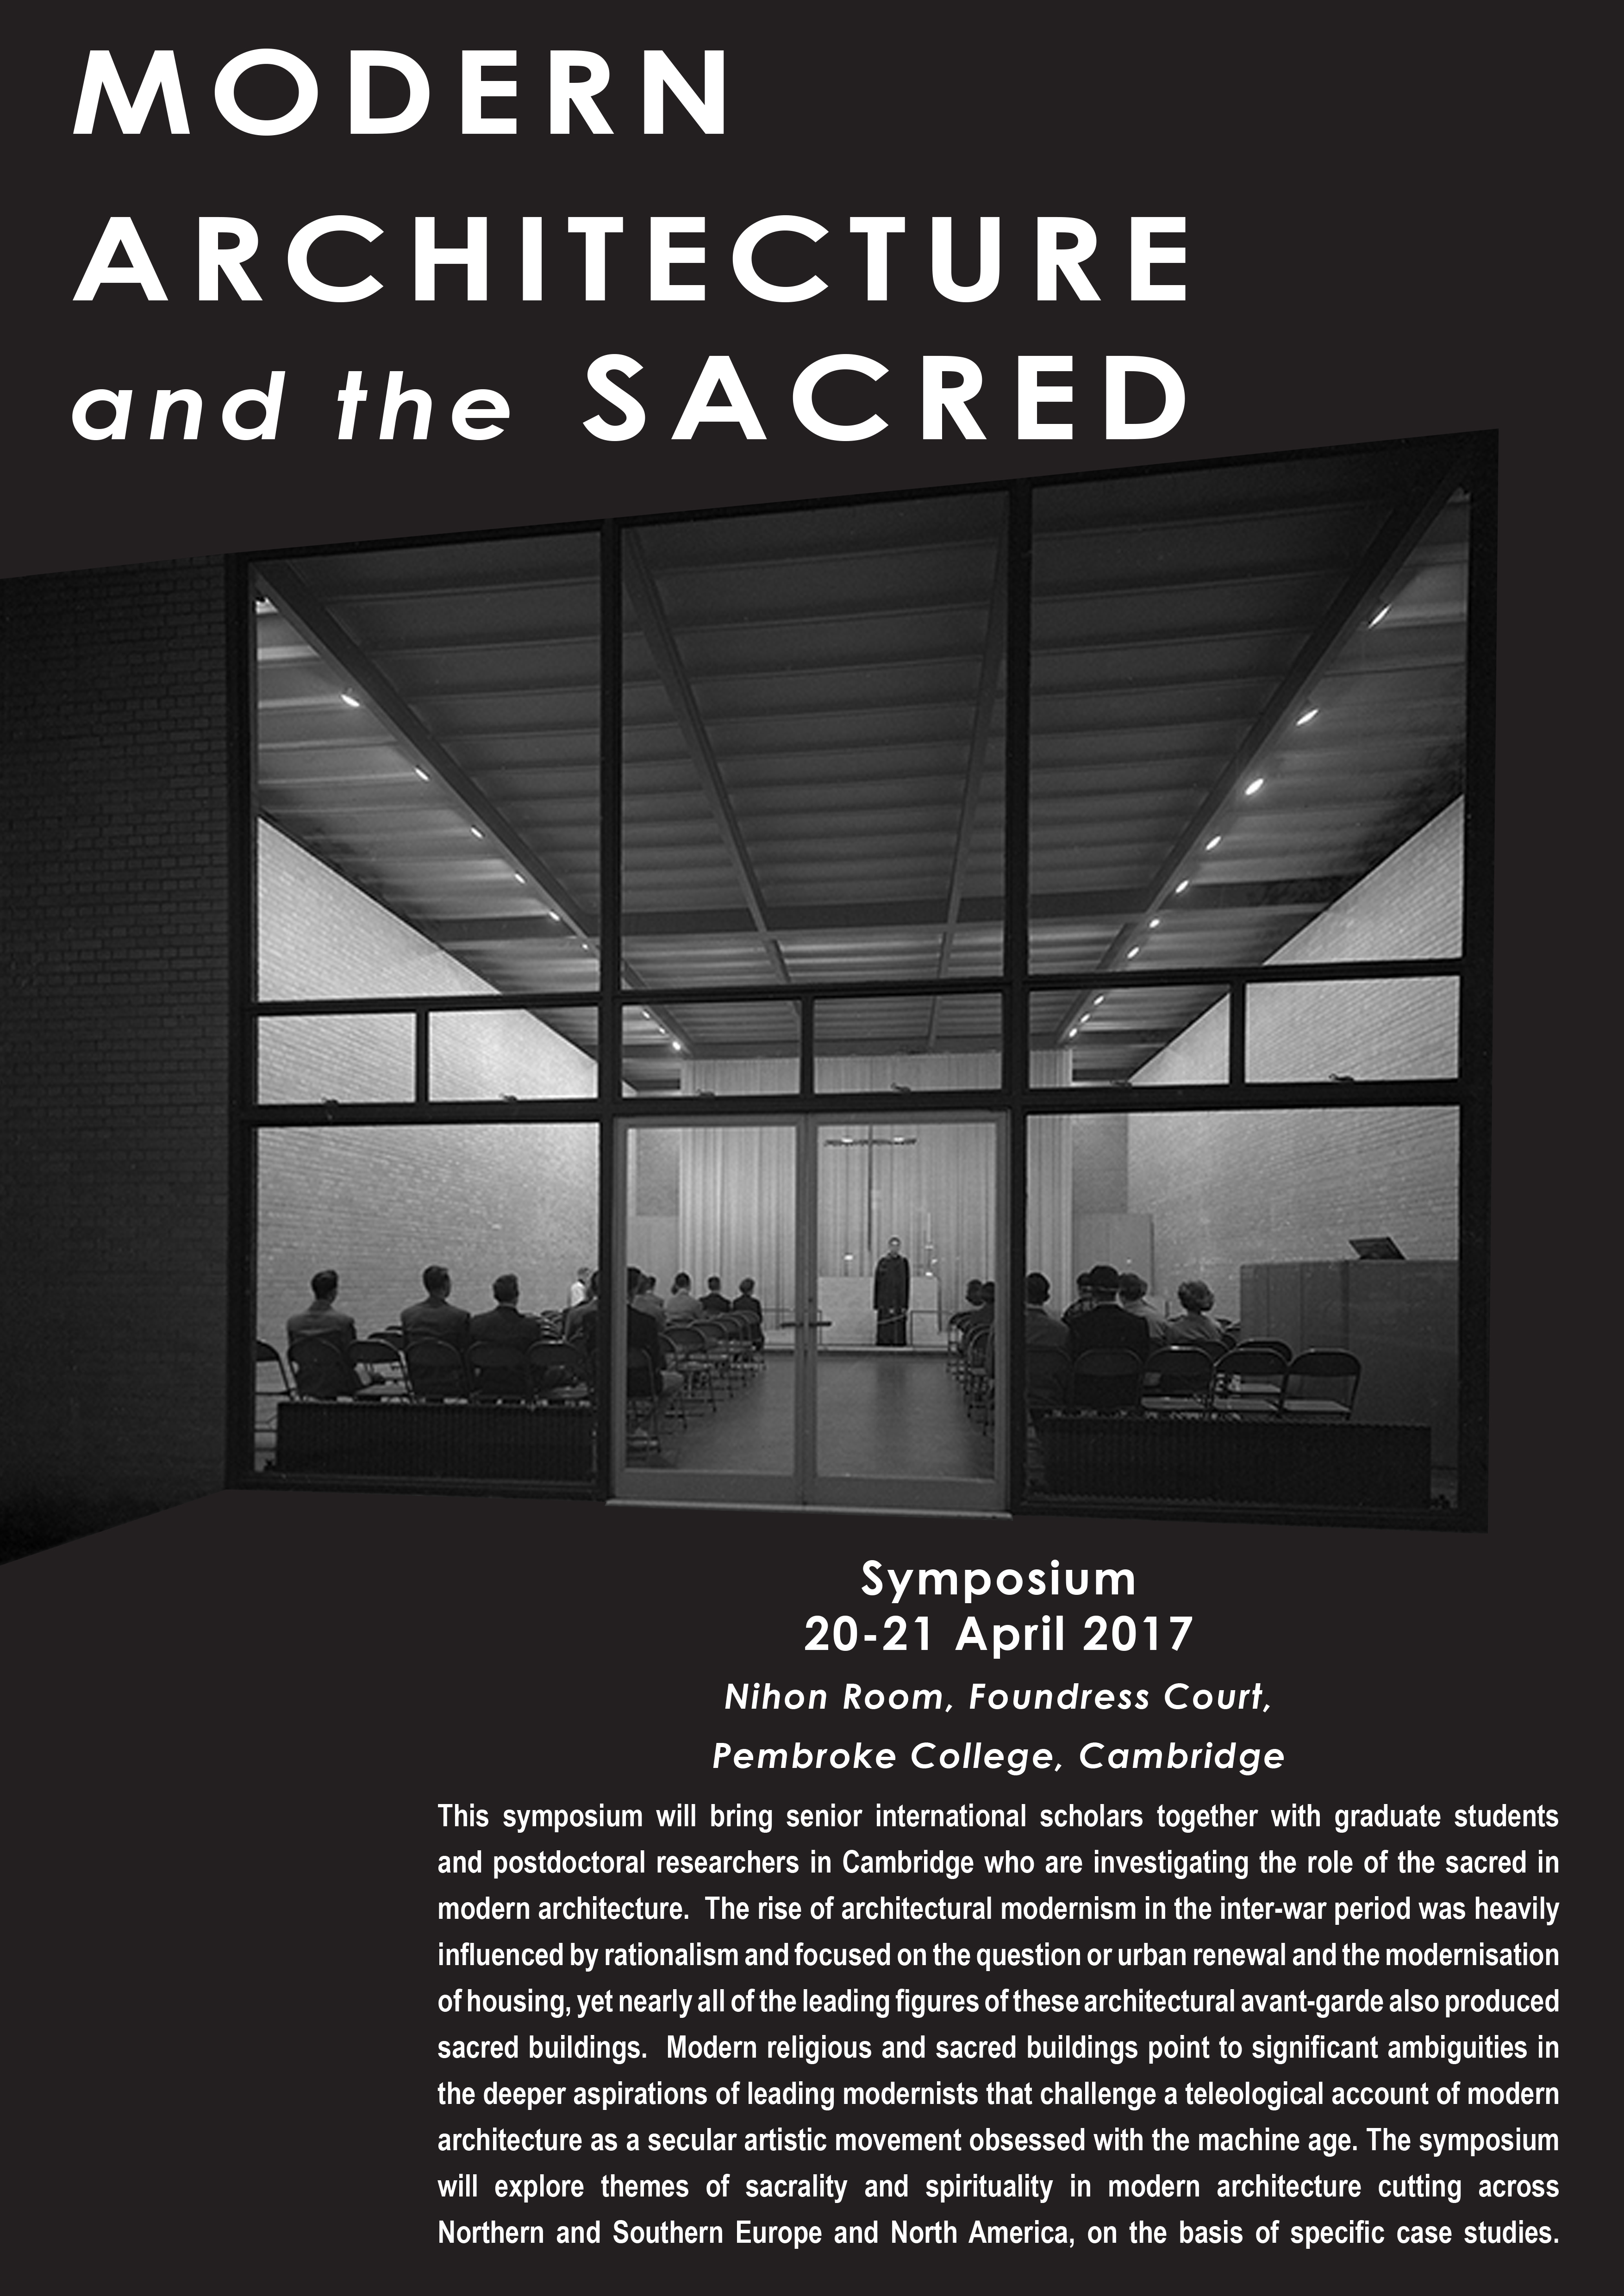 Modern Architecture and the Sacred Cambridge Programme Poster